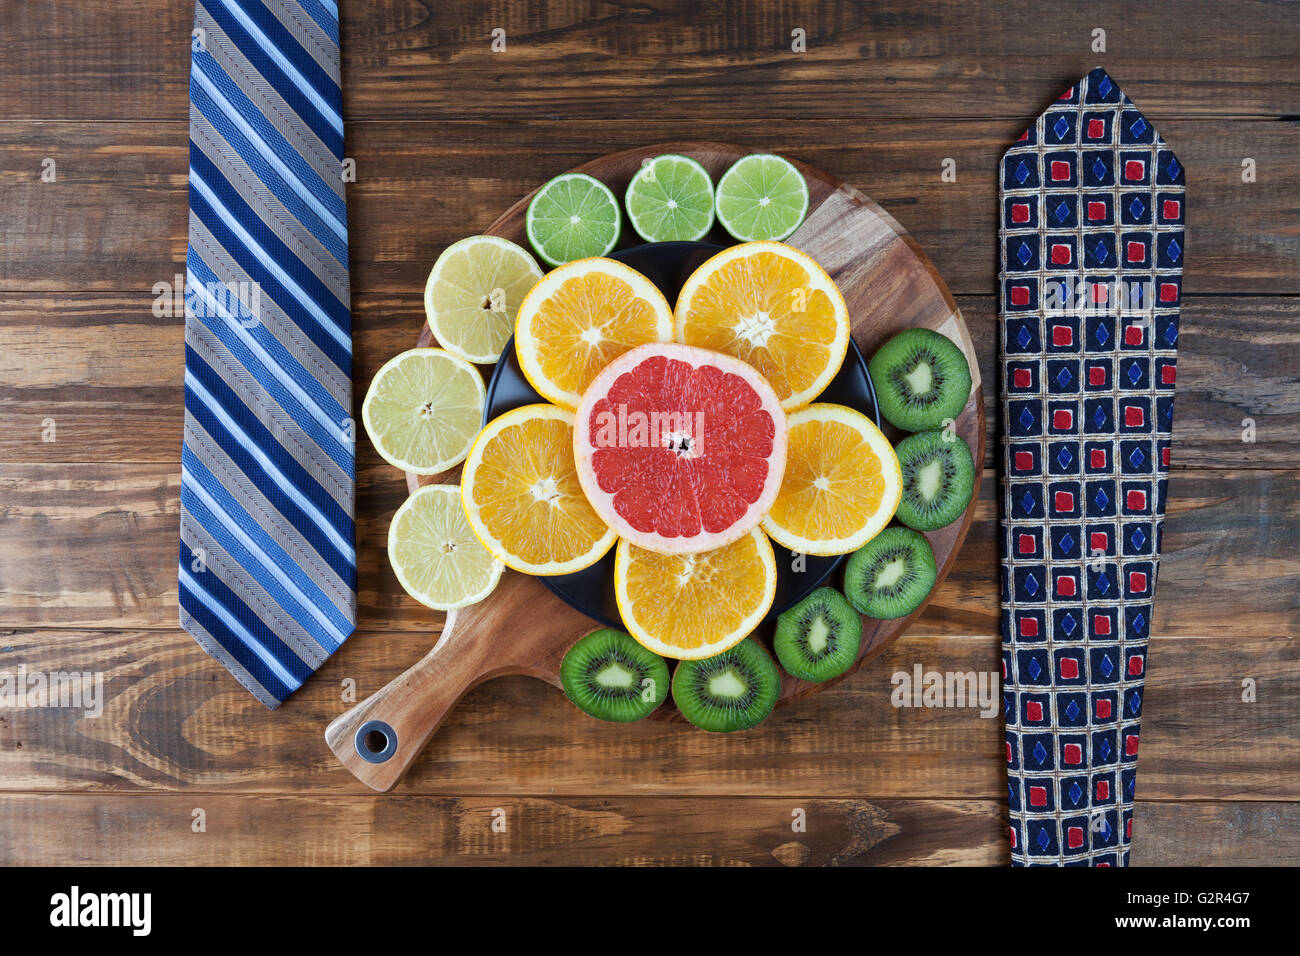 Healthy business lunch concept with ties and sliced citrus fruits on chopping board Stock Photo